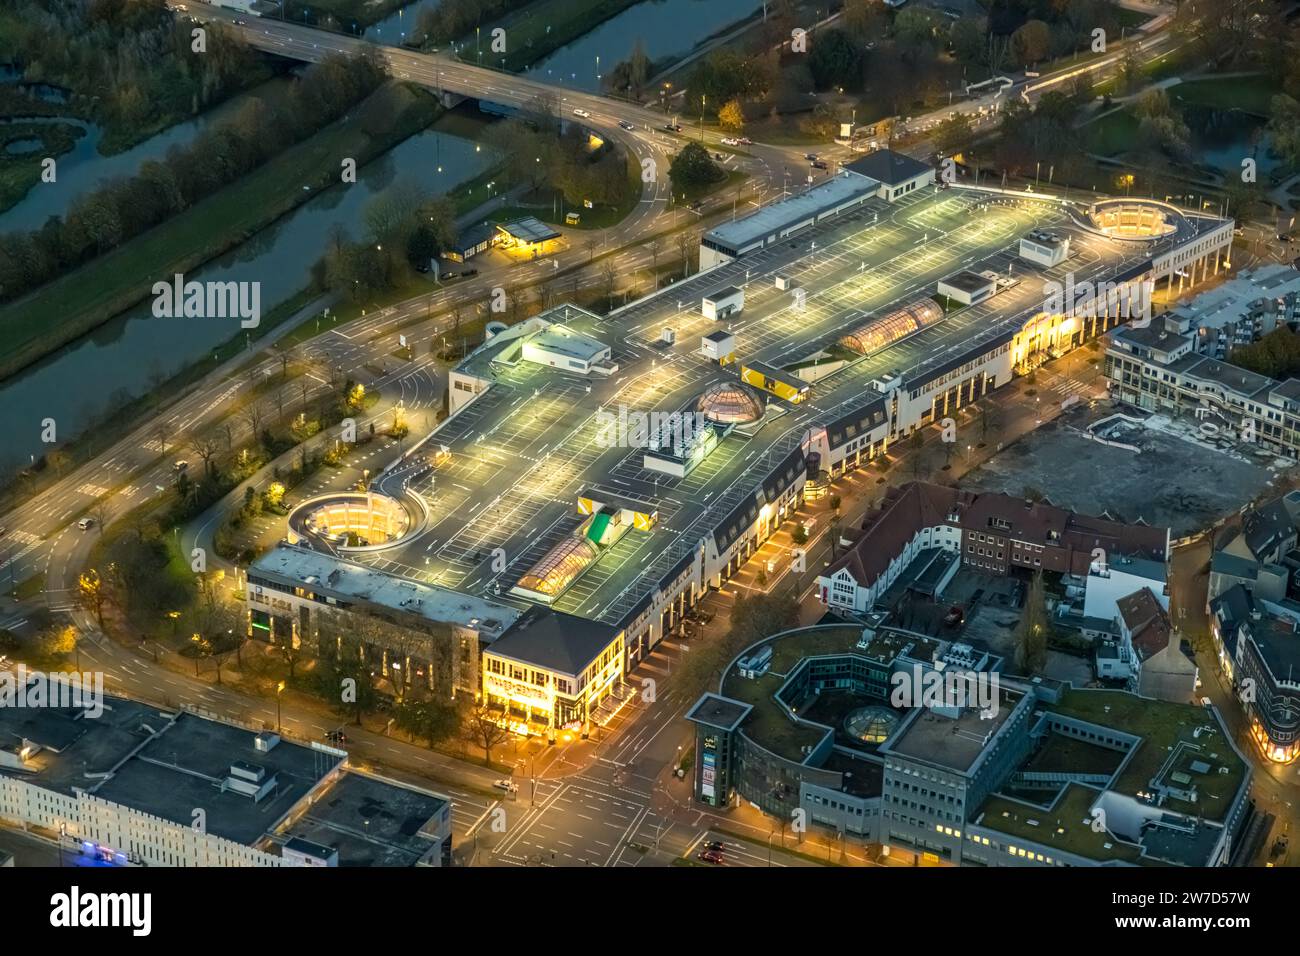 Aerial view, night shot of the Allee-Center Hamm shopping center in the city center, Hamm, Ruhr area, North Rhine-Westphalia, Germany, Evening, Allee- Stock Photo